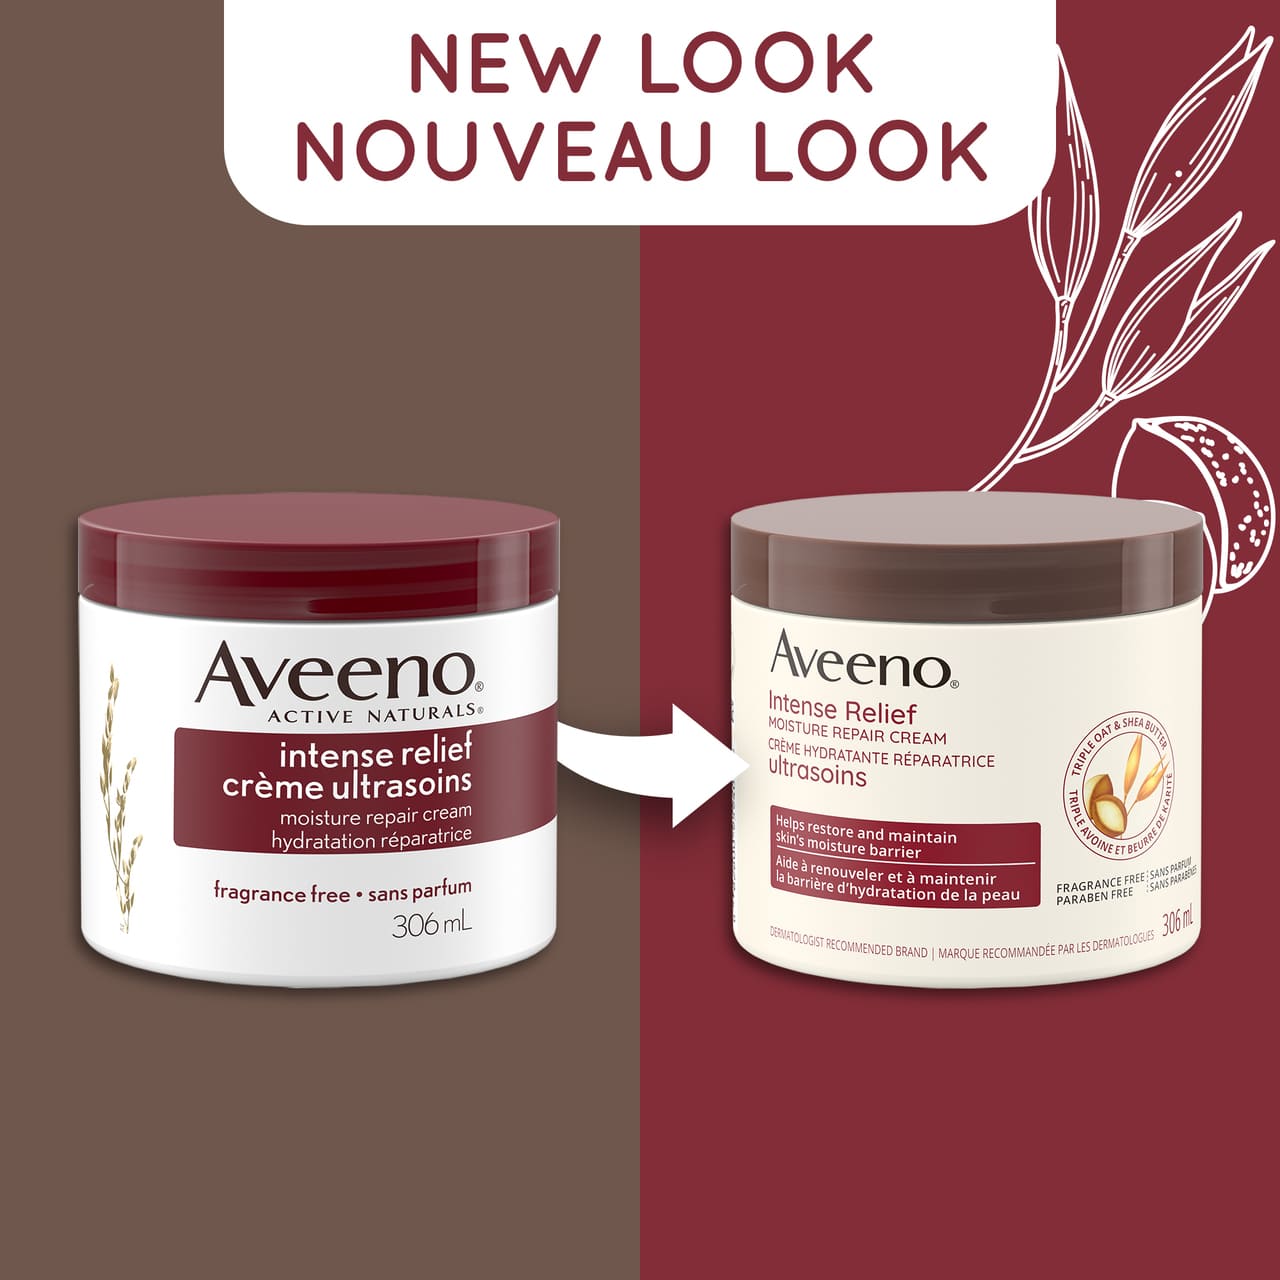 Old and new packaging of AVEENO® Intense Relief Moisture Repair Cream, 306 mL jar, with text 'new look'